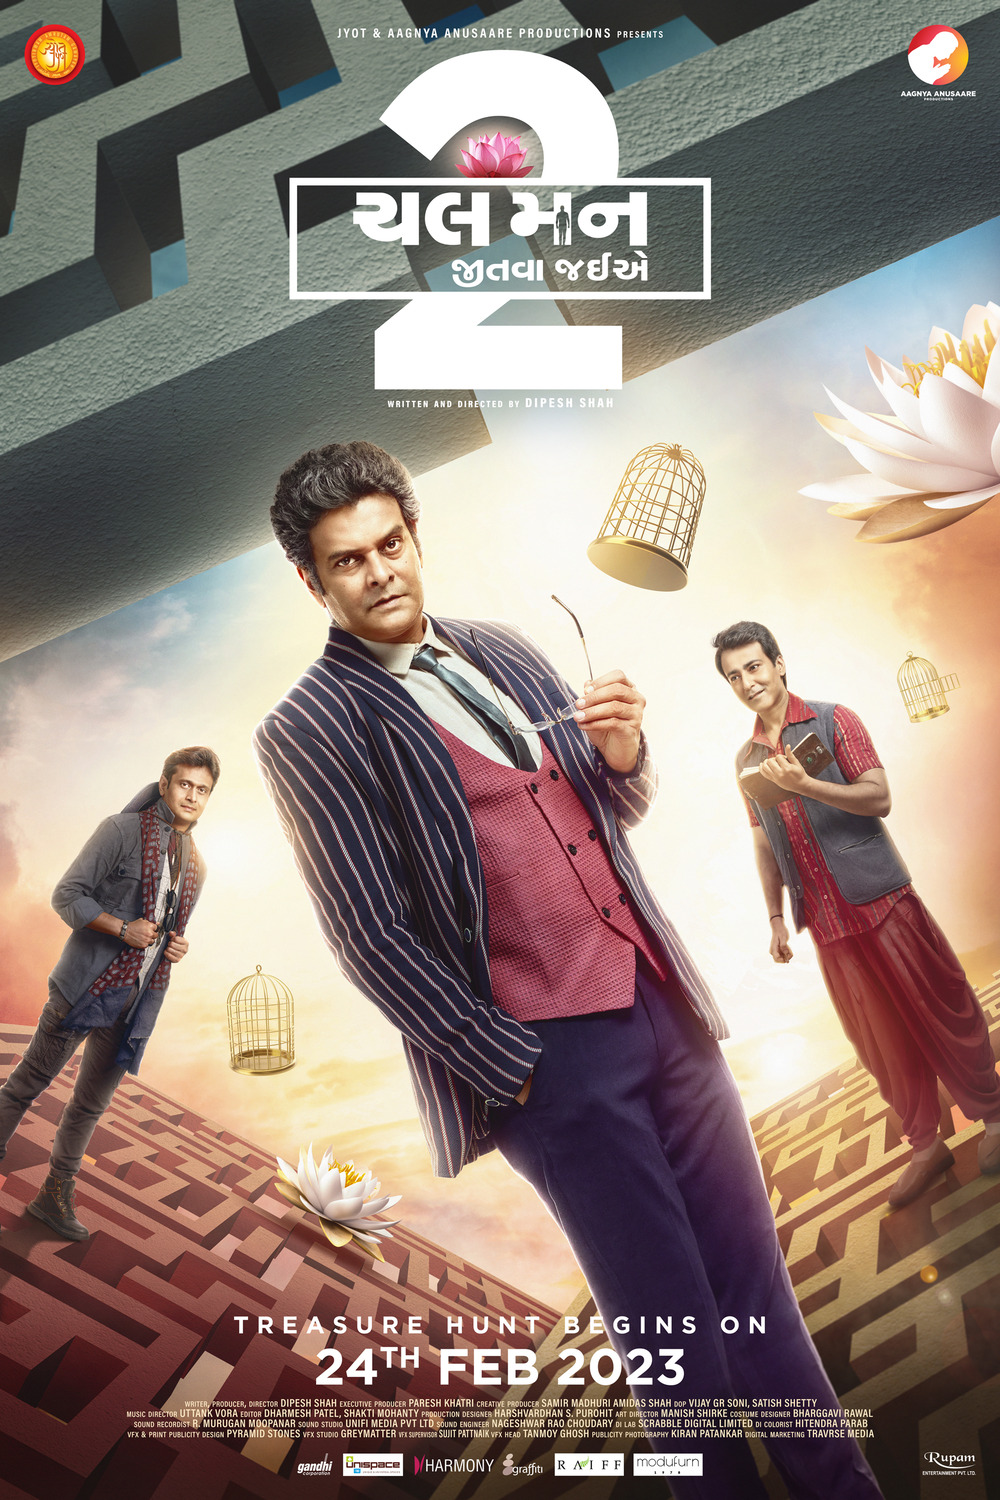 Extra Large Movie Poster Image for Chal Mann Jeetva Jaiye 2 (#3 of 3)